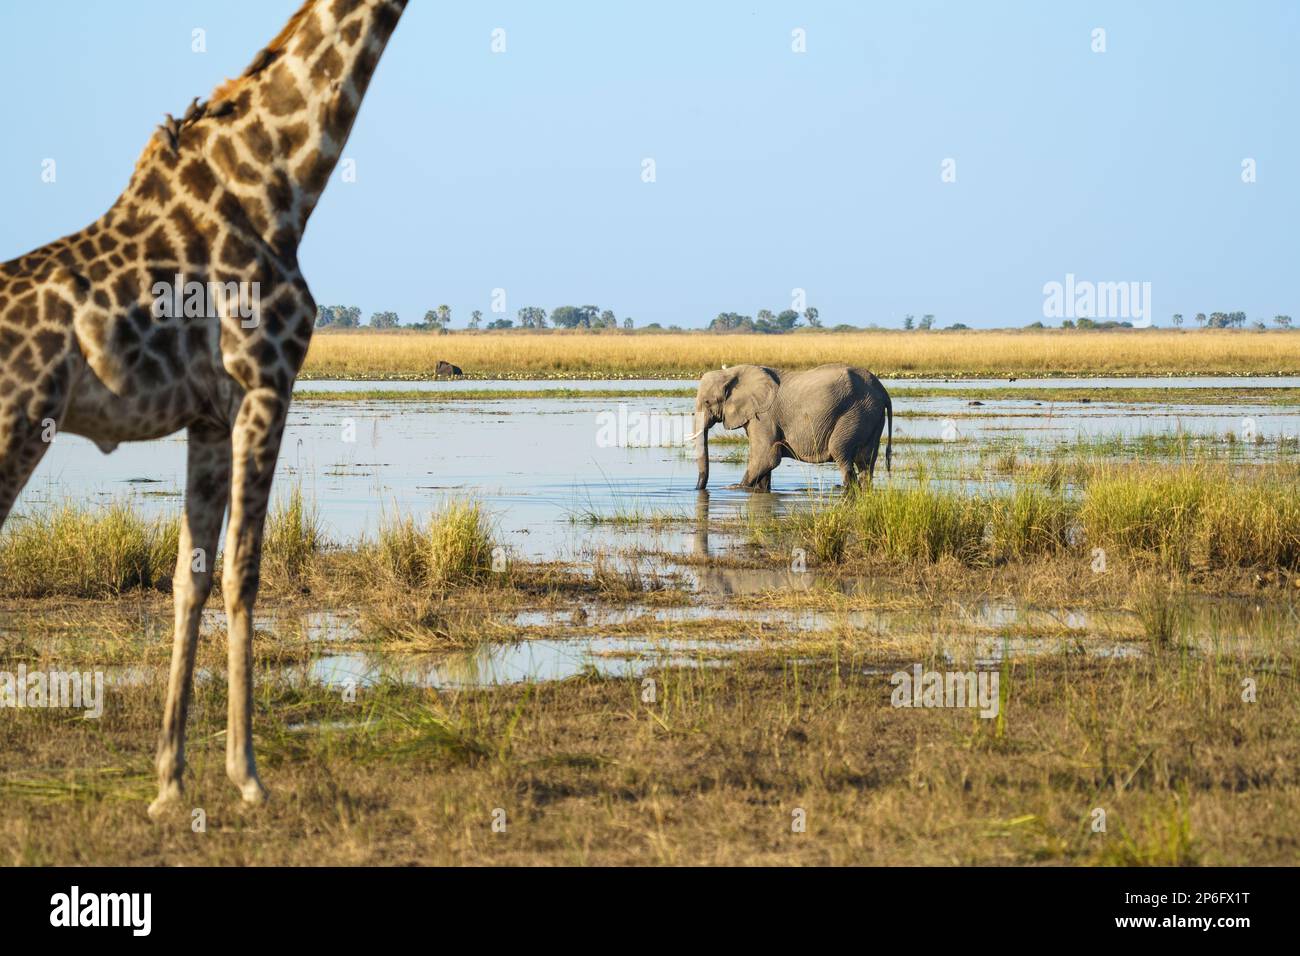 Elephant, Loxodonta africana, goes into water of the Cobe River. A giraffe stands on the left side in the image. Chobe National Park, Botswana, Africa Stock Photo